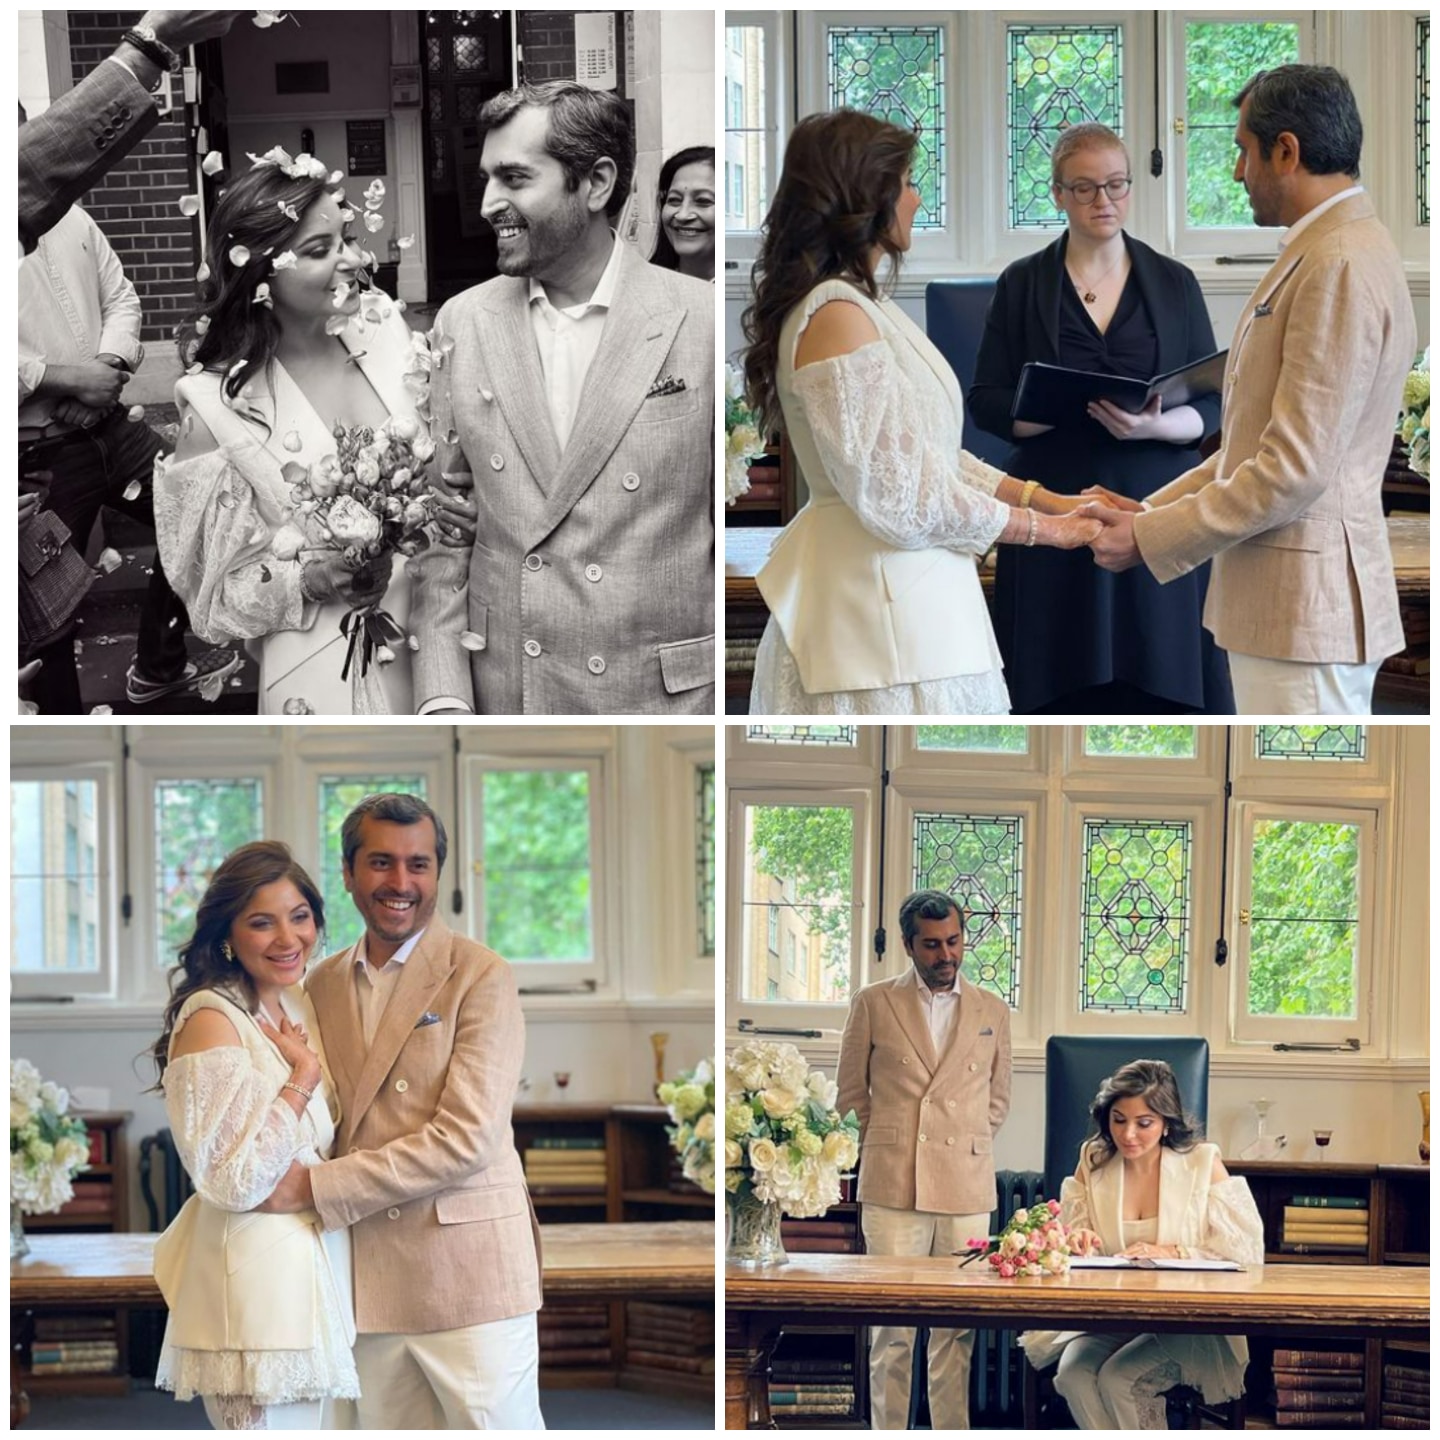 Kanika Kapoor shares pictures from her white wedding.